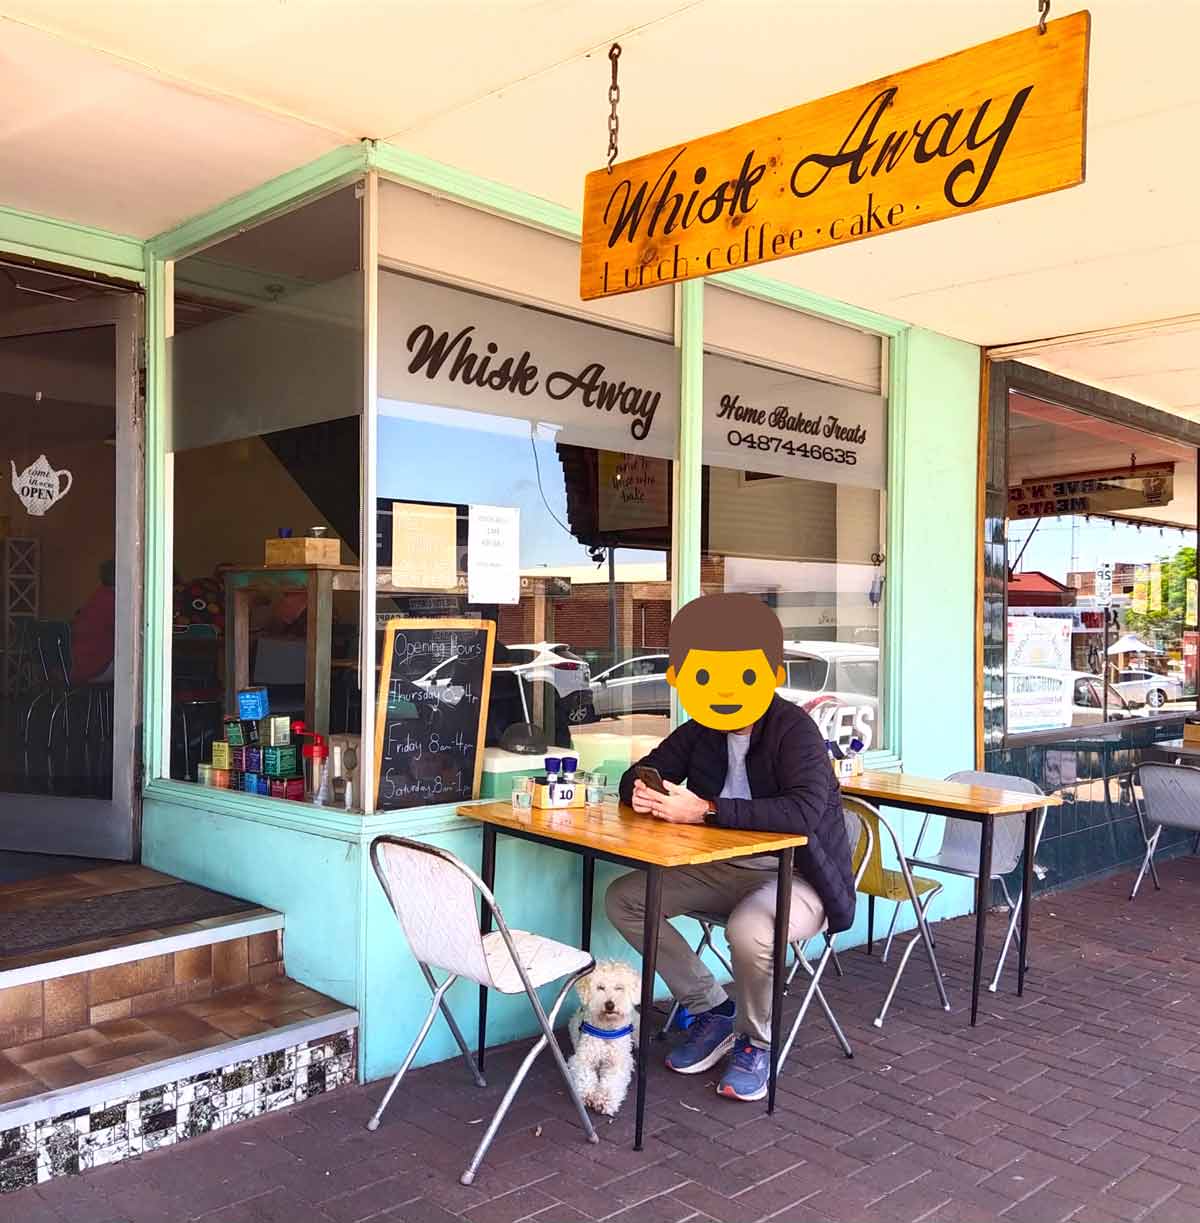 Whisk Away Cafe in Whyalla, Eyre Peninsula, South Australia